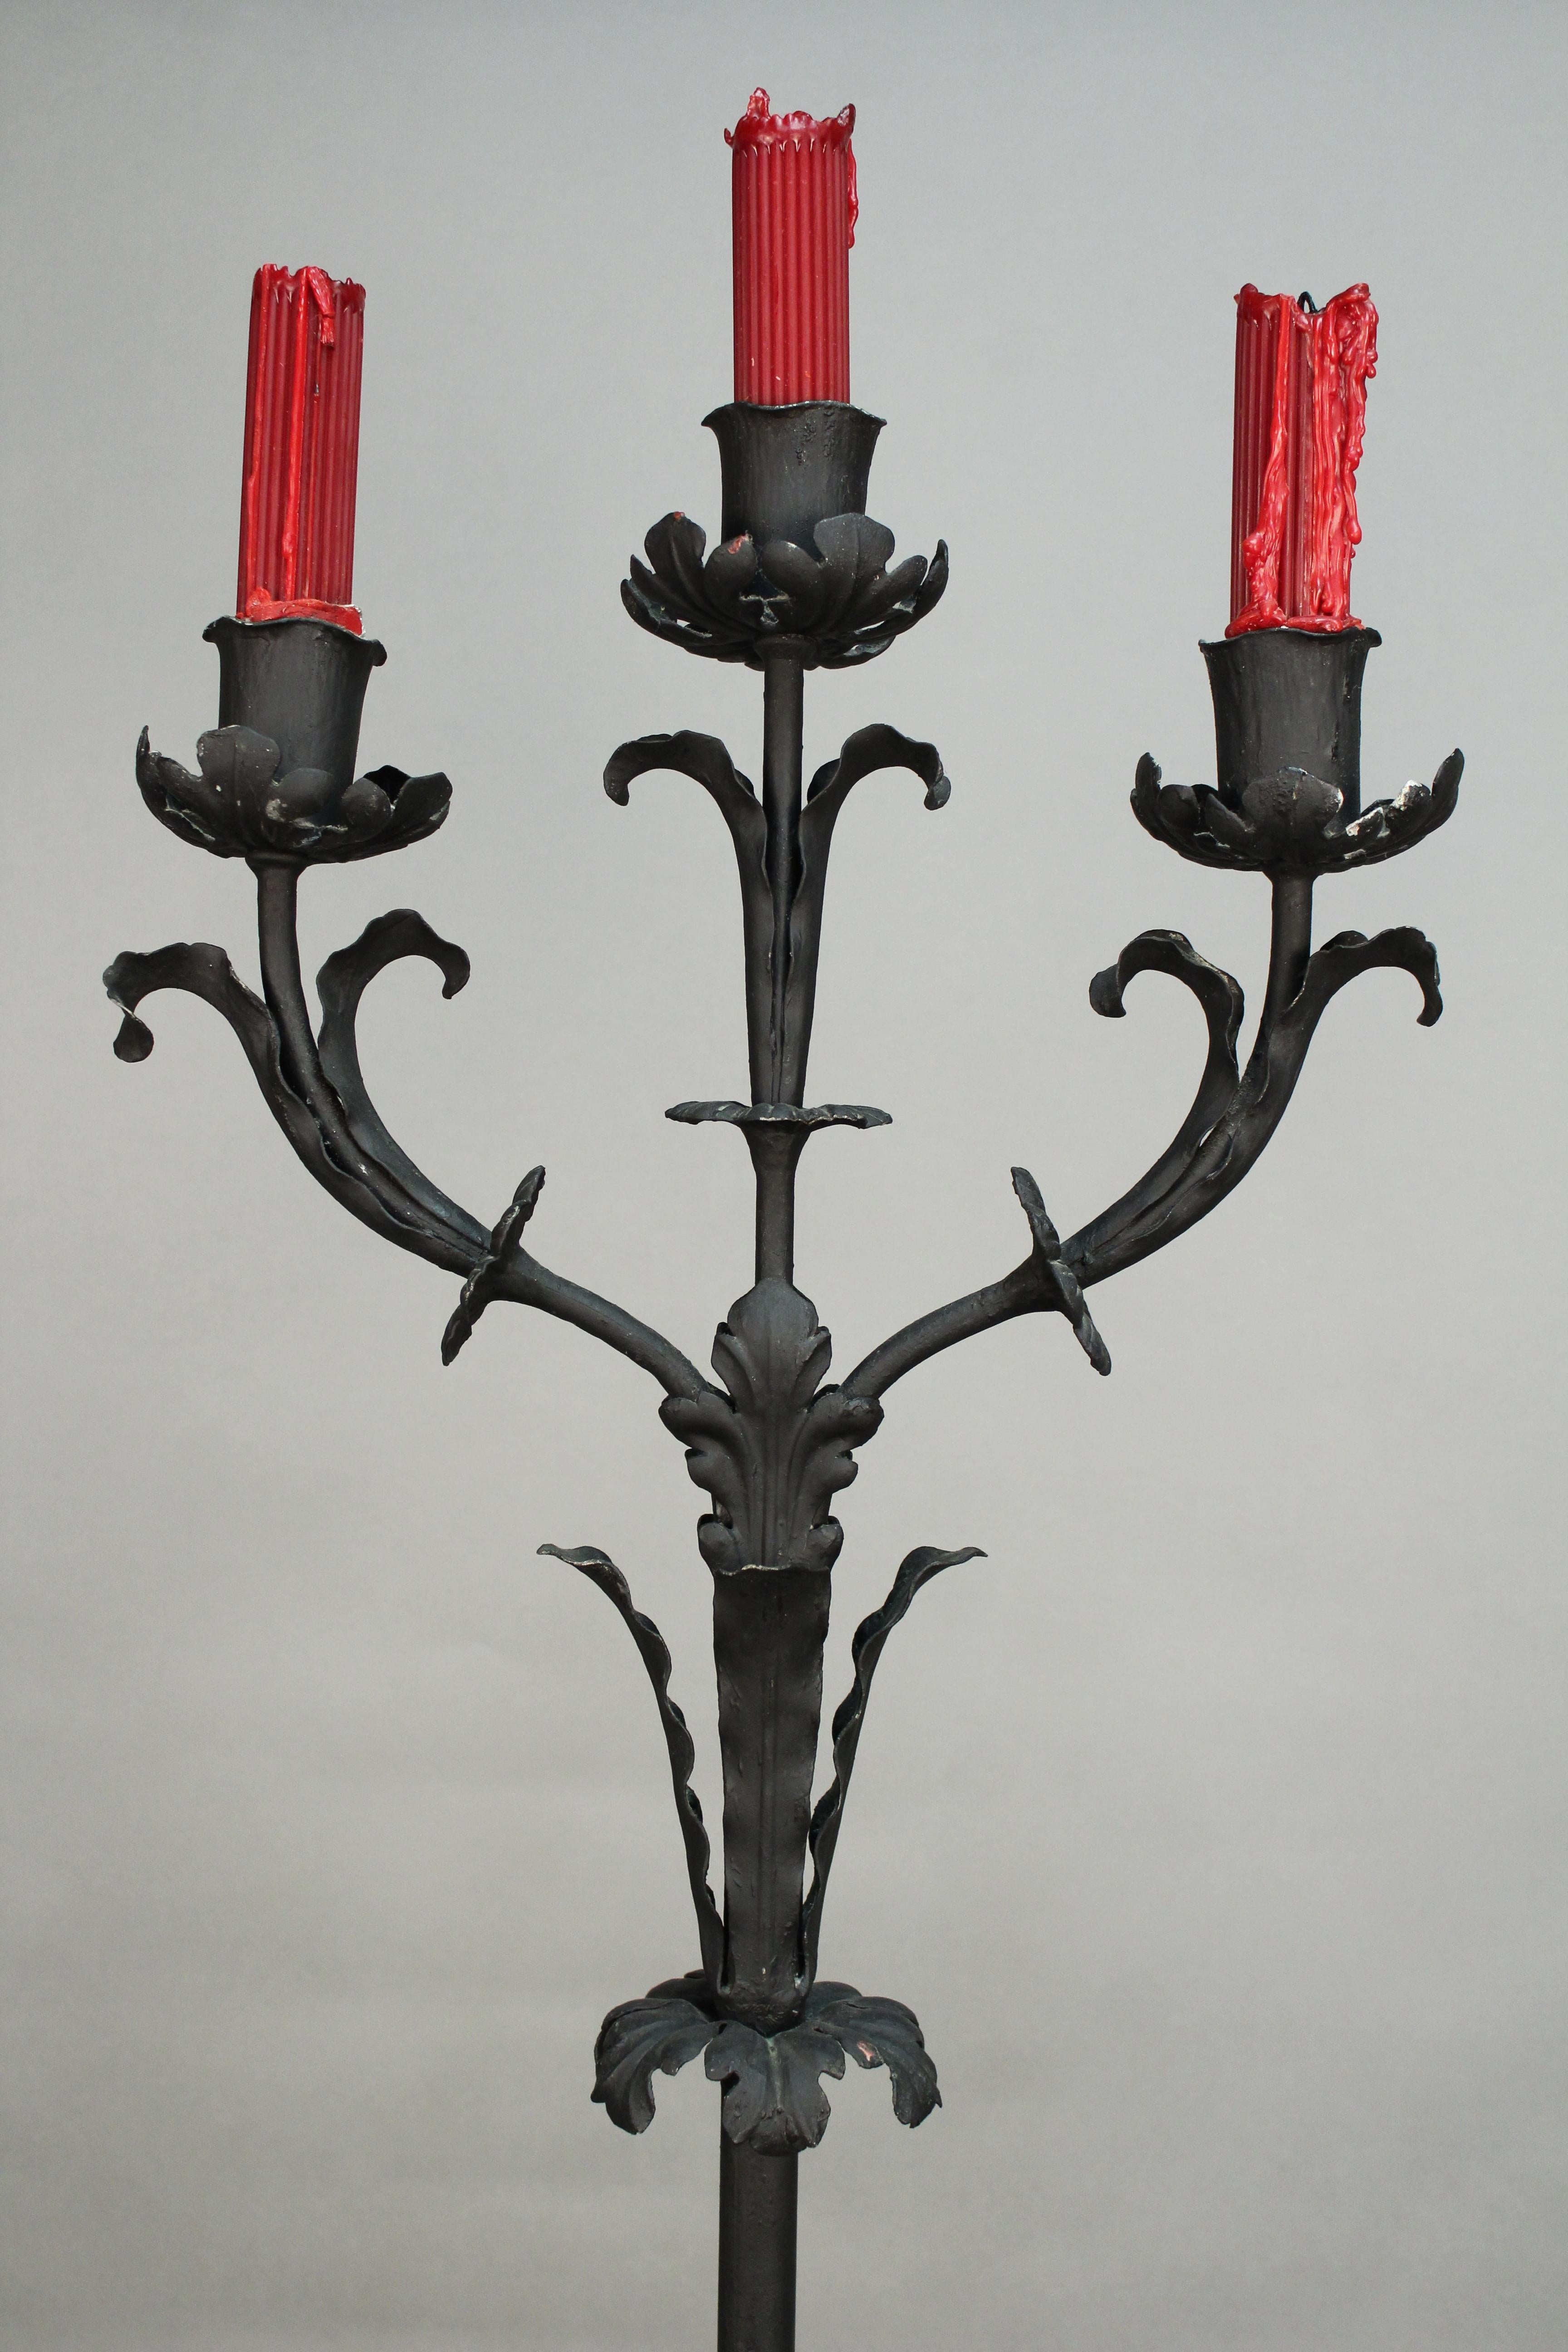 Spanish Colonial Pair of Tall Wrought Iron Candleholders Fits Nicely with Spanish Revival Tudor